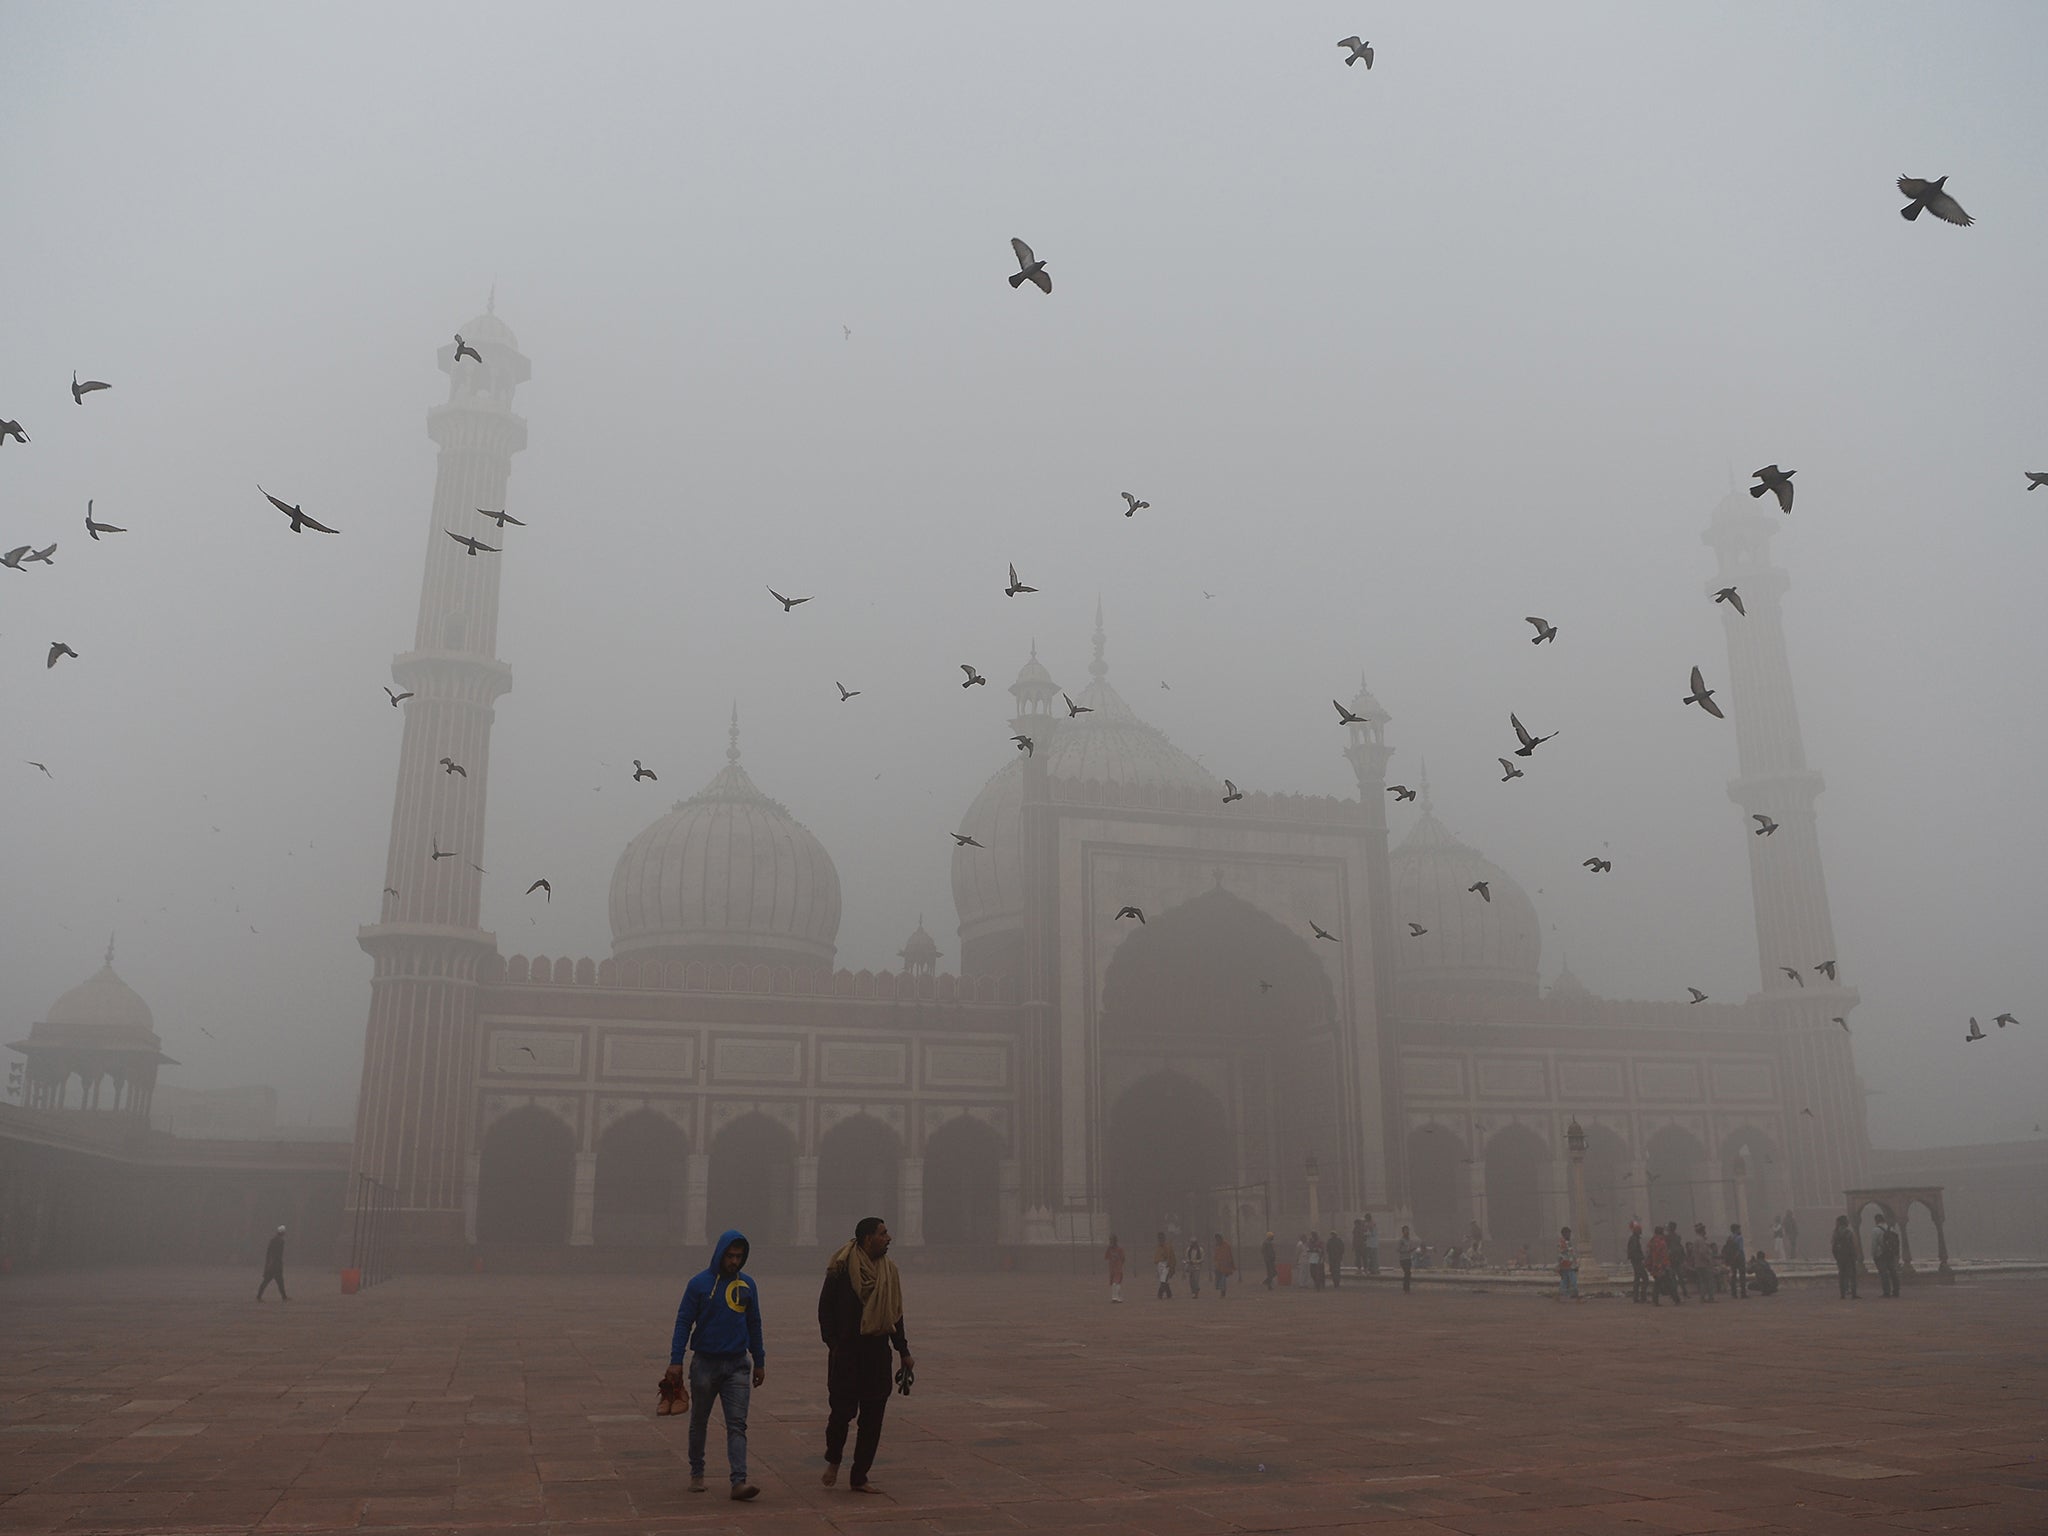 It's not uncommon for areas across India to be shrouded in deadly smog